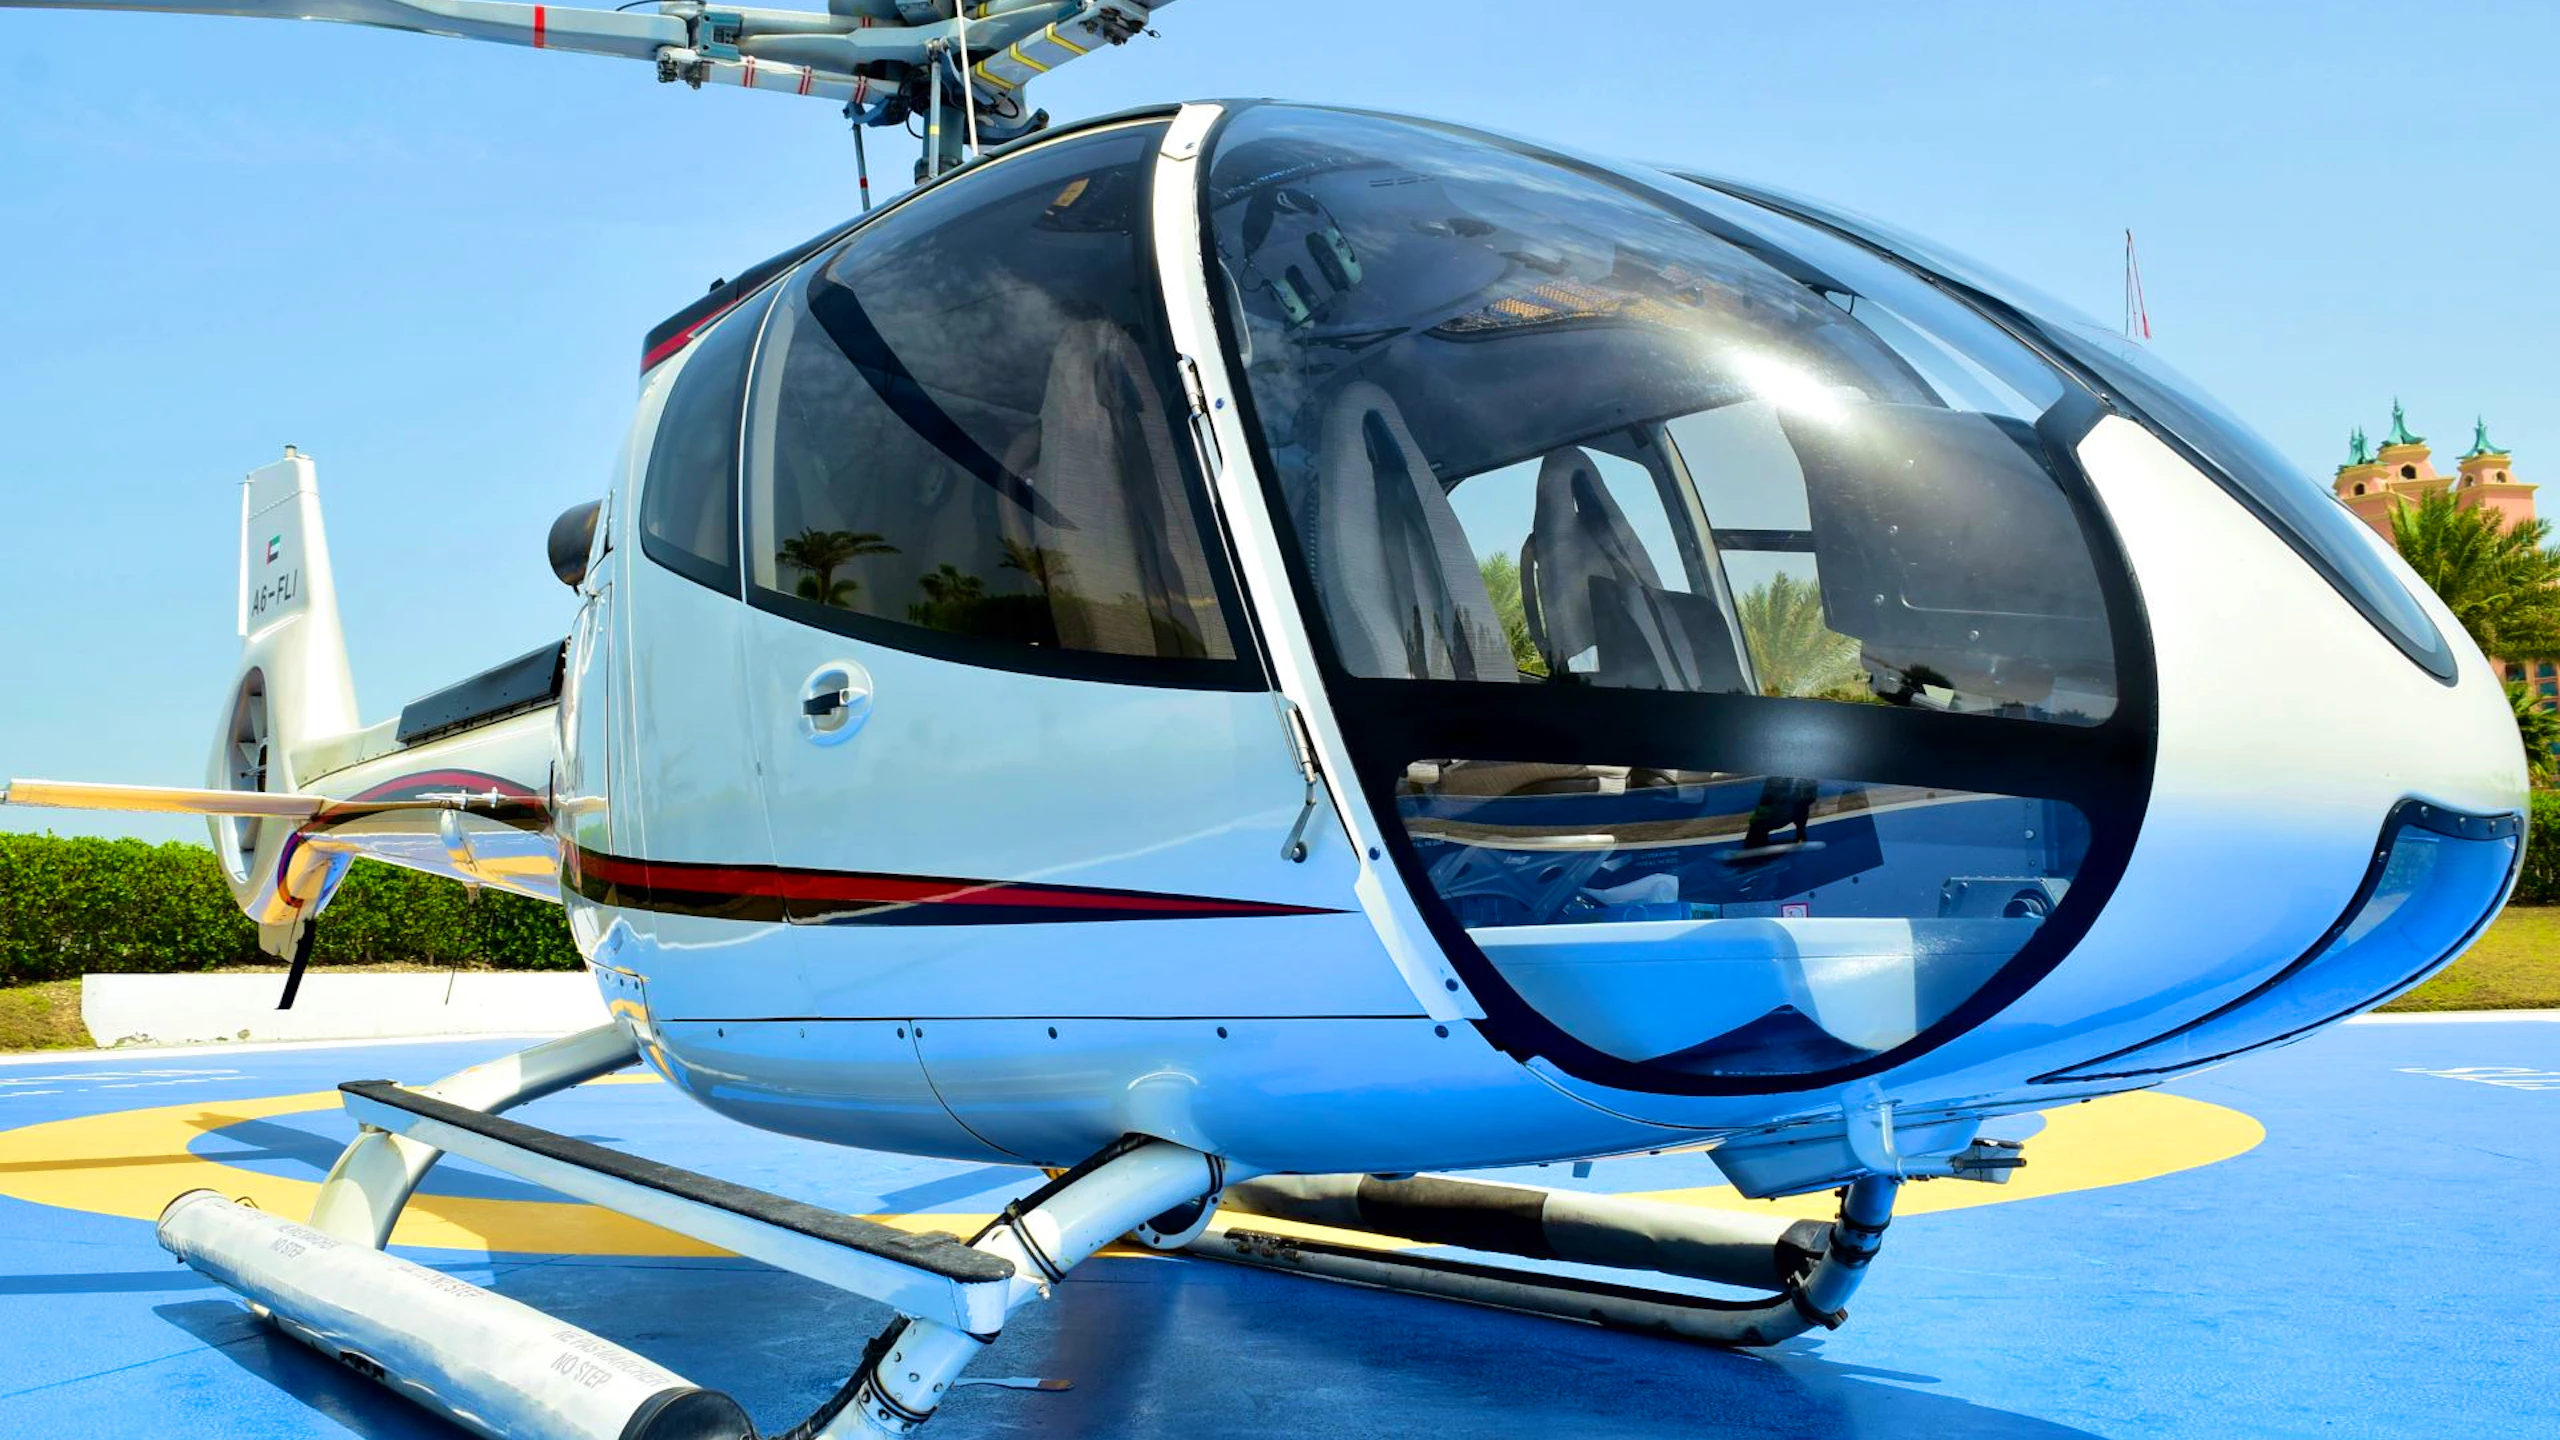 Dubai Helicopter Ride: An Aerial Adventure (15-Minutes) Discount